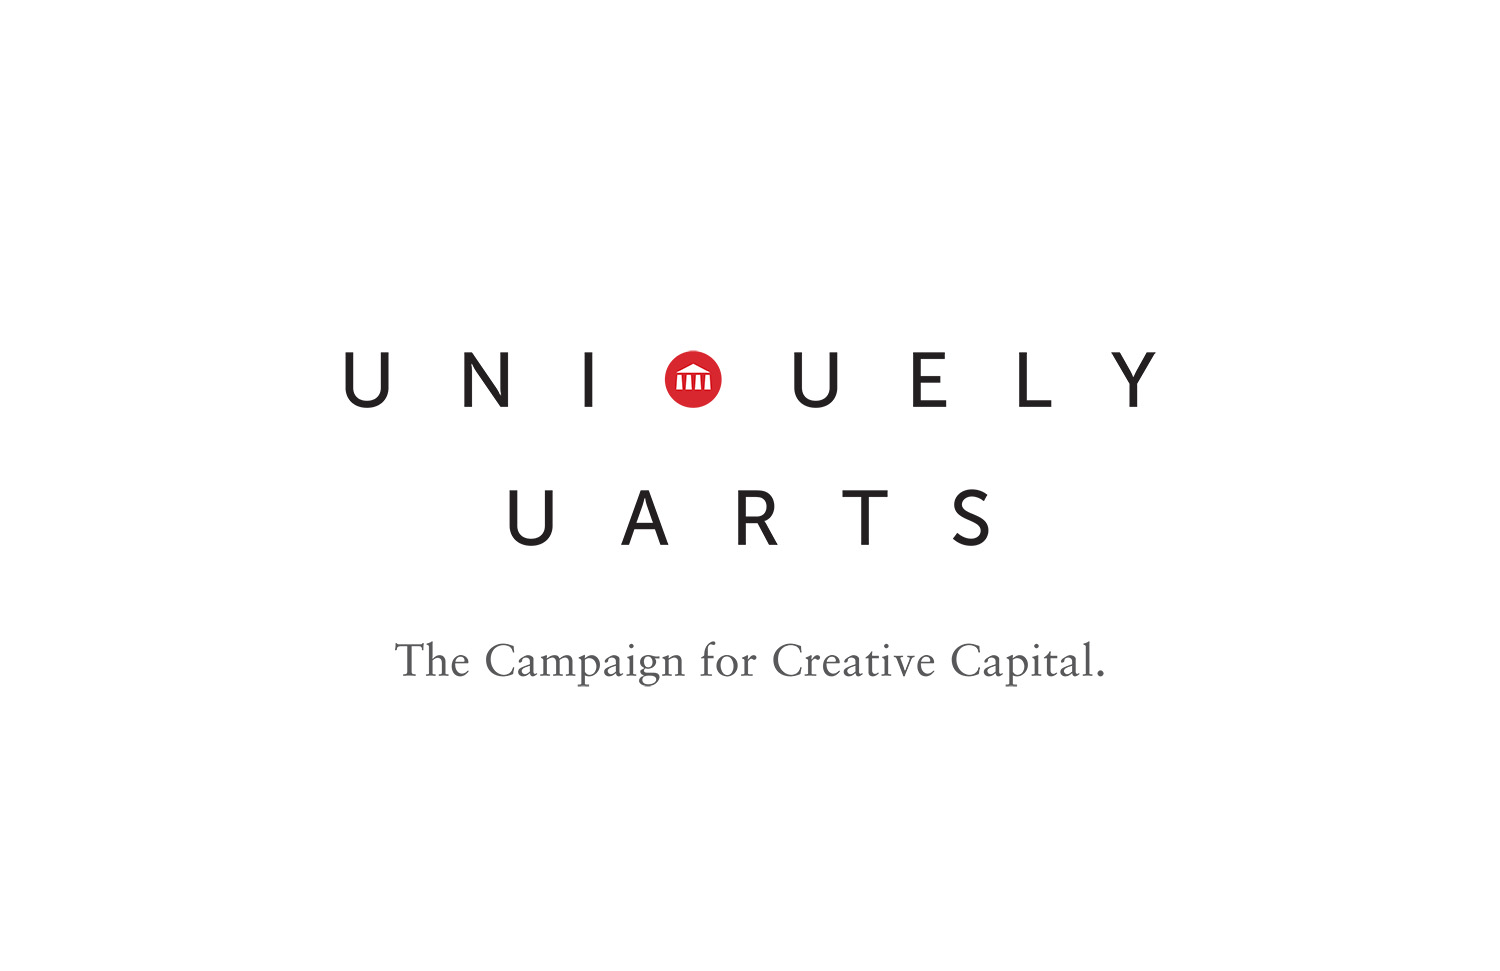 Graphic image of the "Uniquely UArts" logo. The text reads "Uniquely UArts" in all caps (the "N" in Uniquely is the red, circular UArts logo mark.) "The Campaign for Creative Capital." is in gray, serif text below.